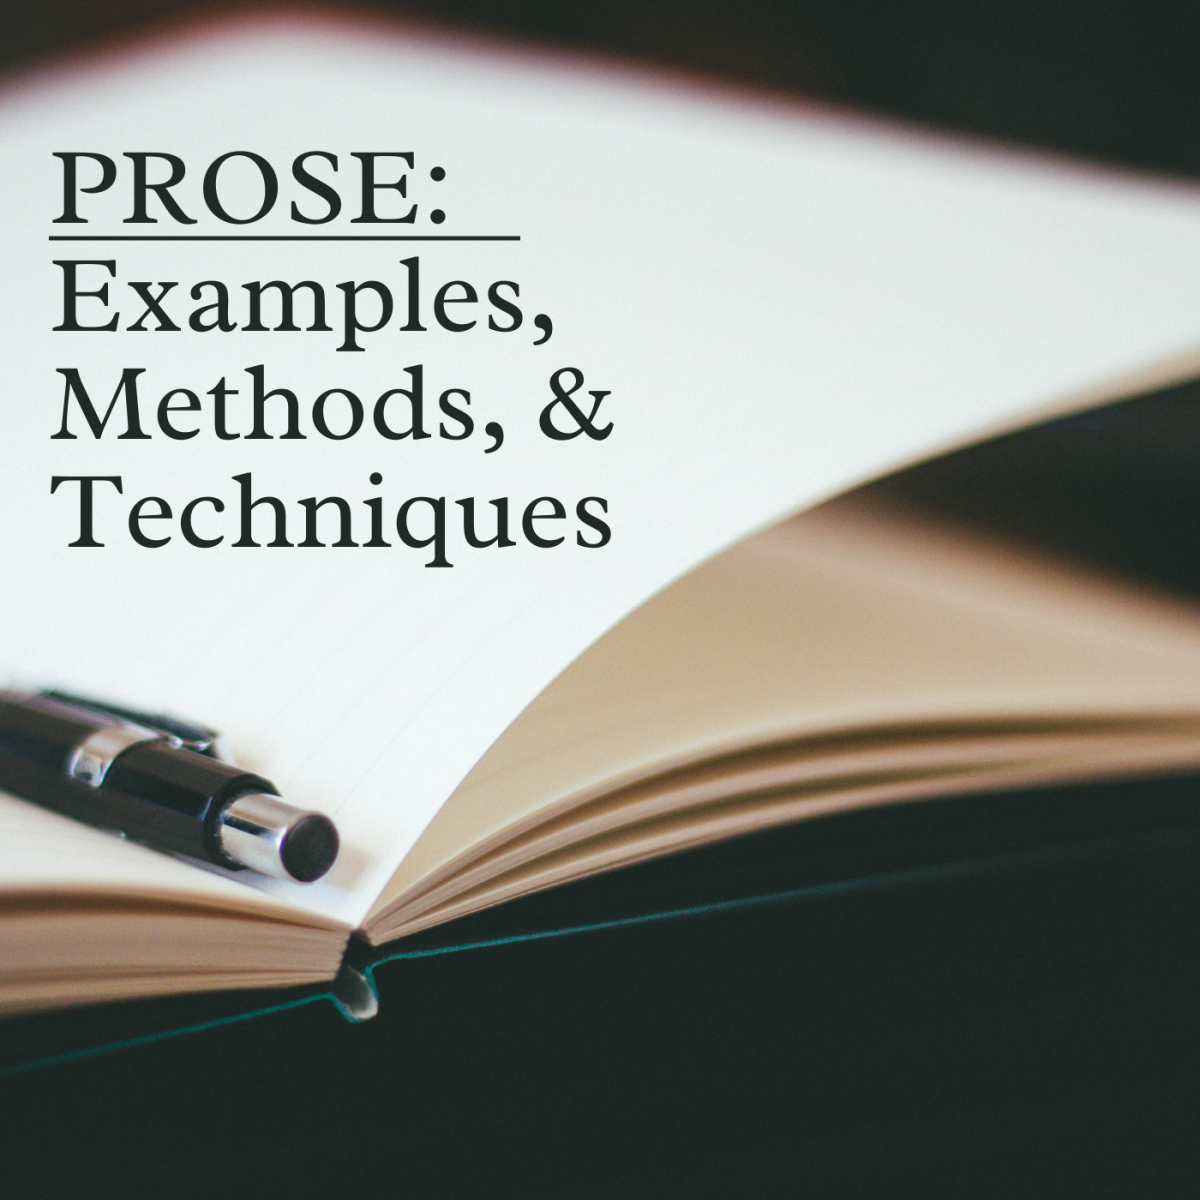 Narrative Methods and Devices in Prose Works